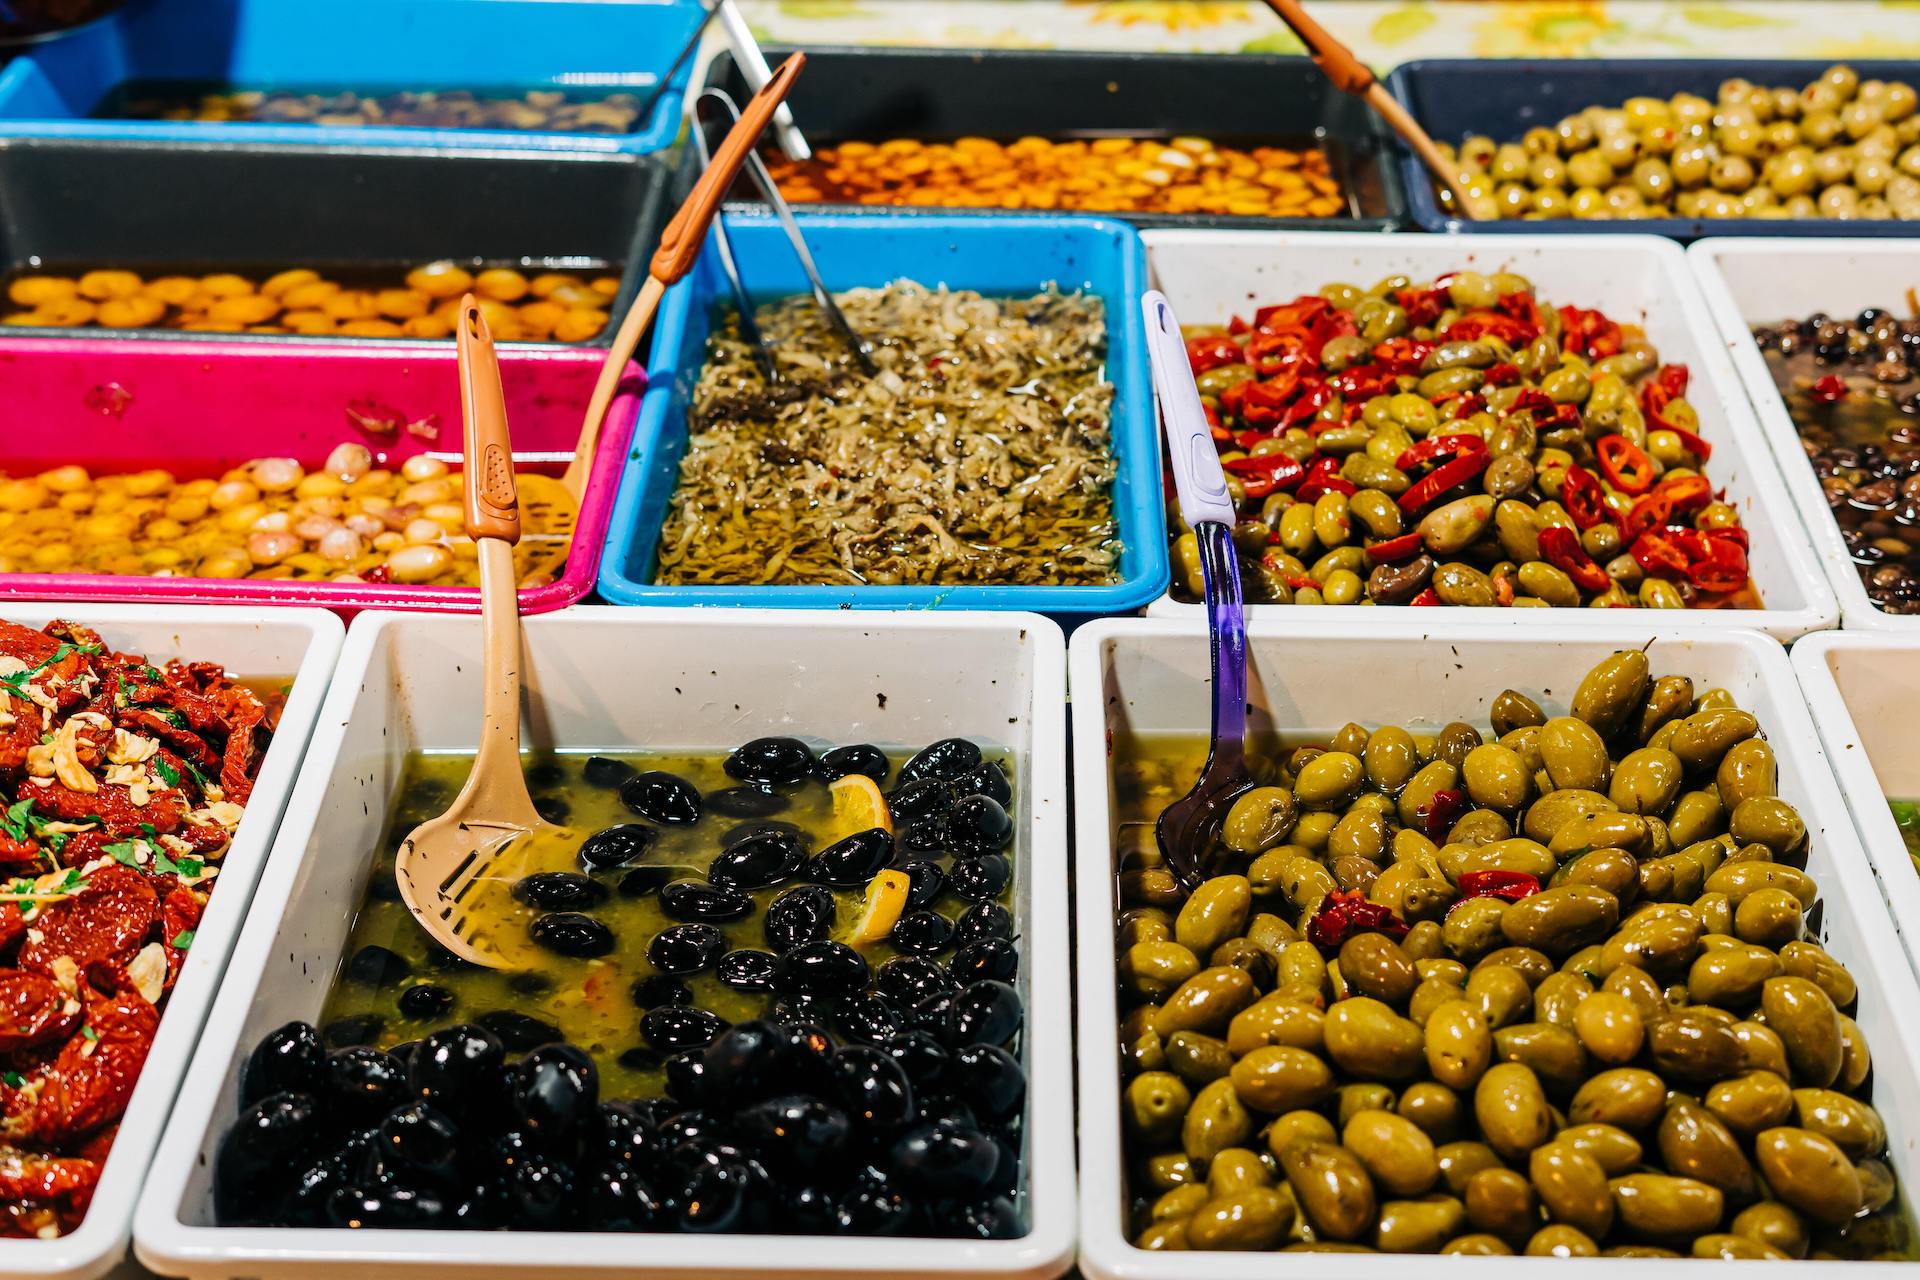 Selection of olives at a market